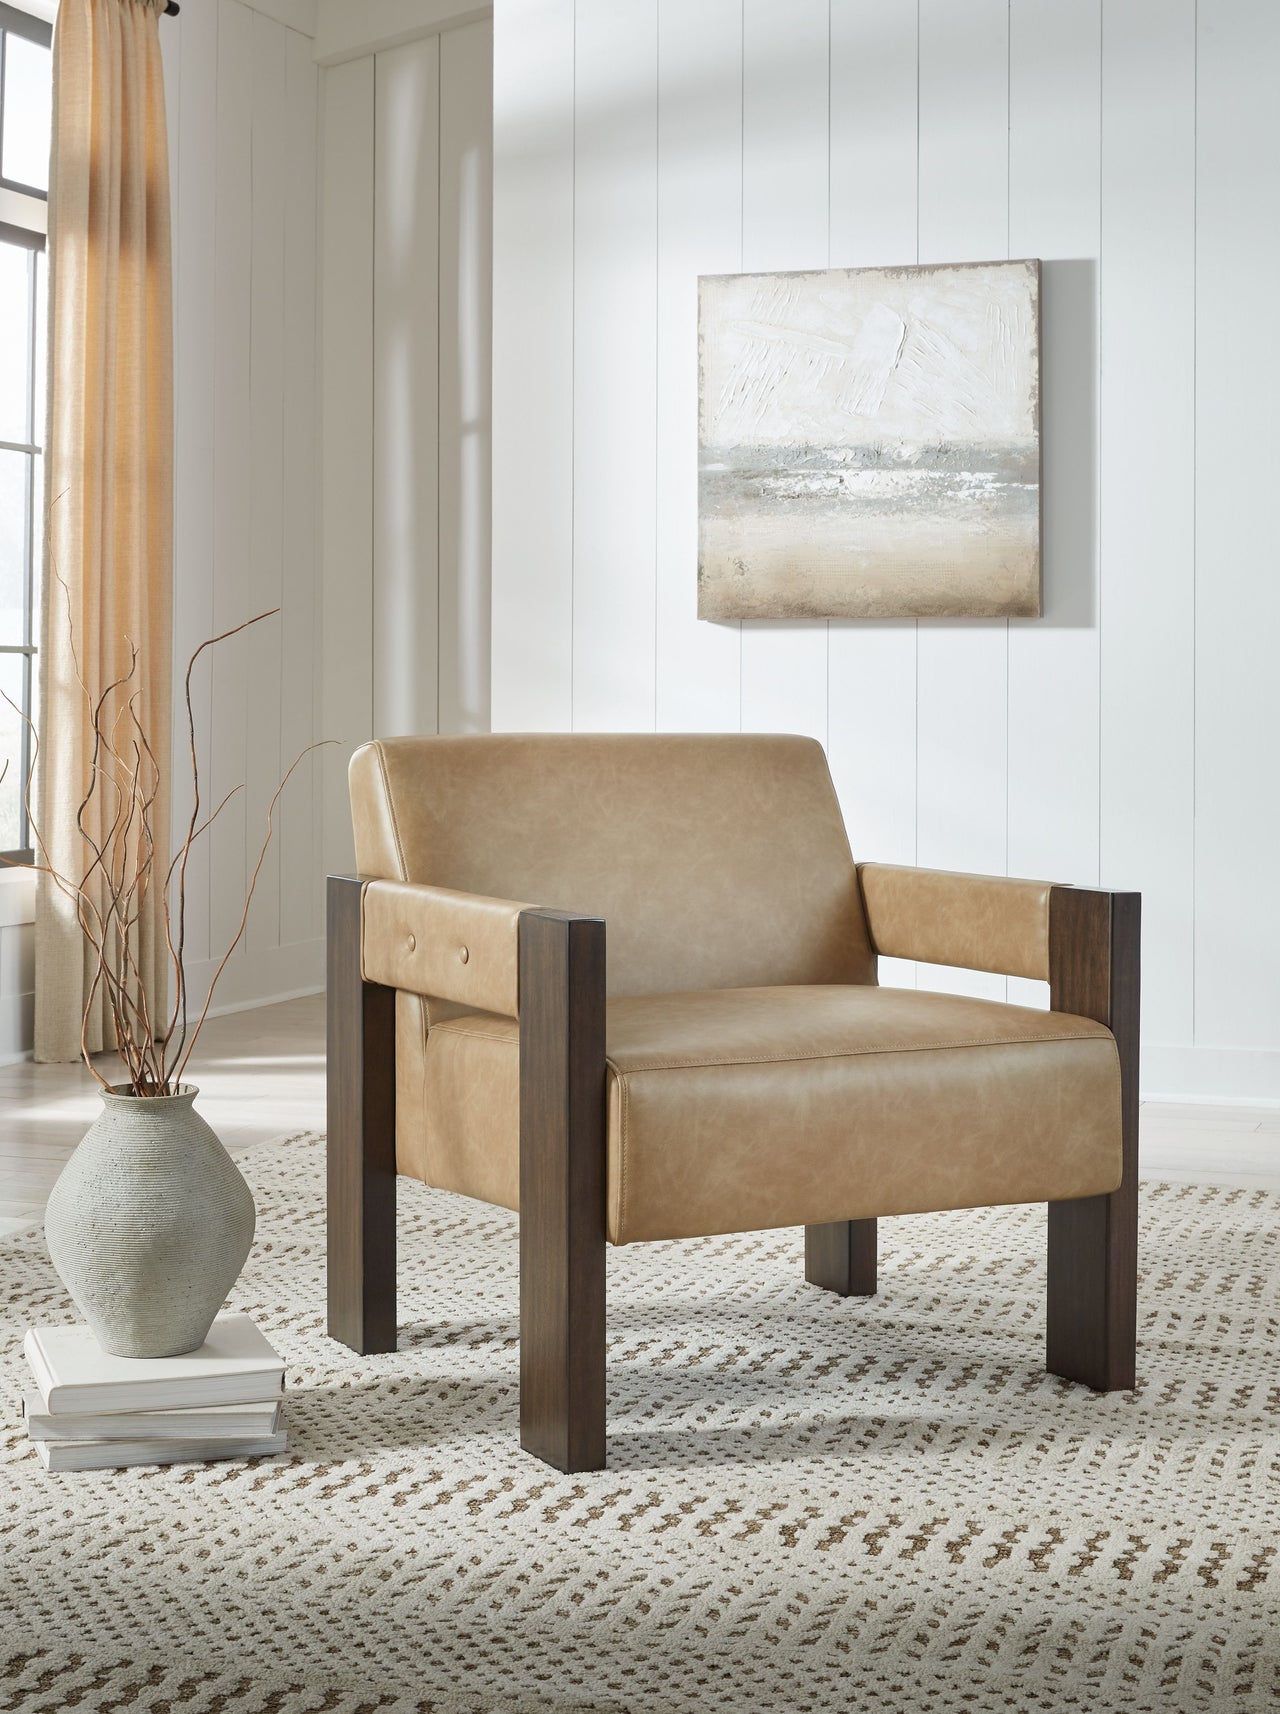 Adlanlock - Accent Chair - Tony's Home Furnishings